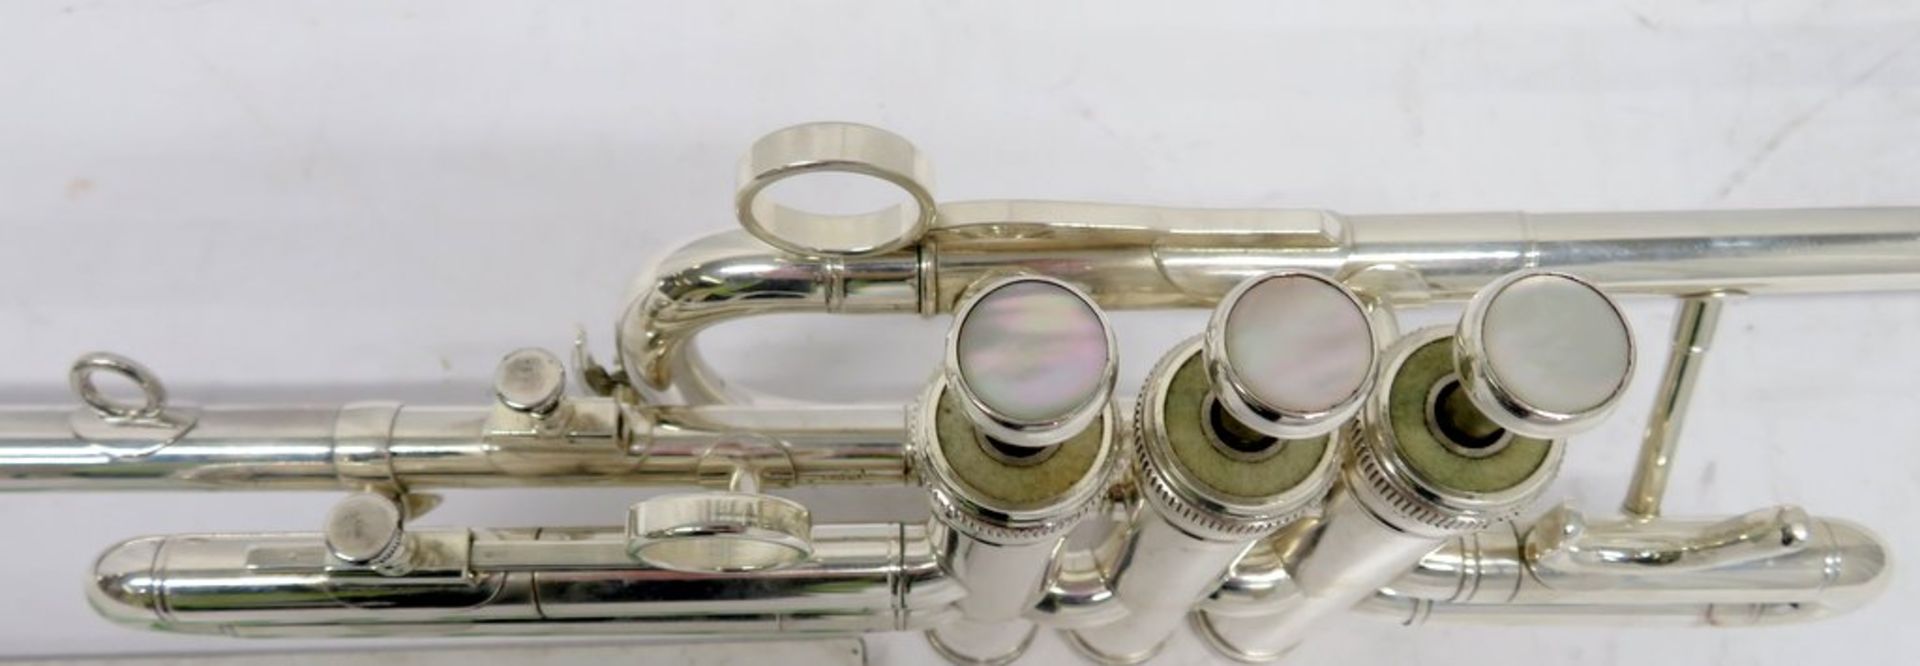 Besson International BE706 Fanfare Trumpet With Case. Serial Number: 885306. Please Note T - Image 8 of 14